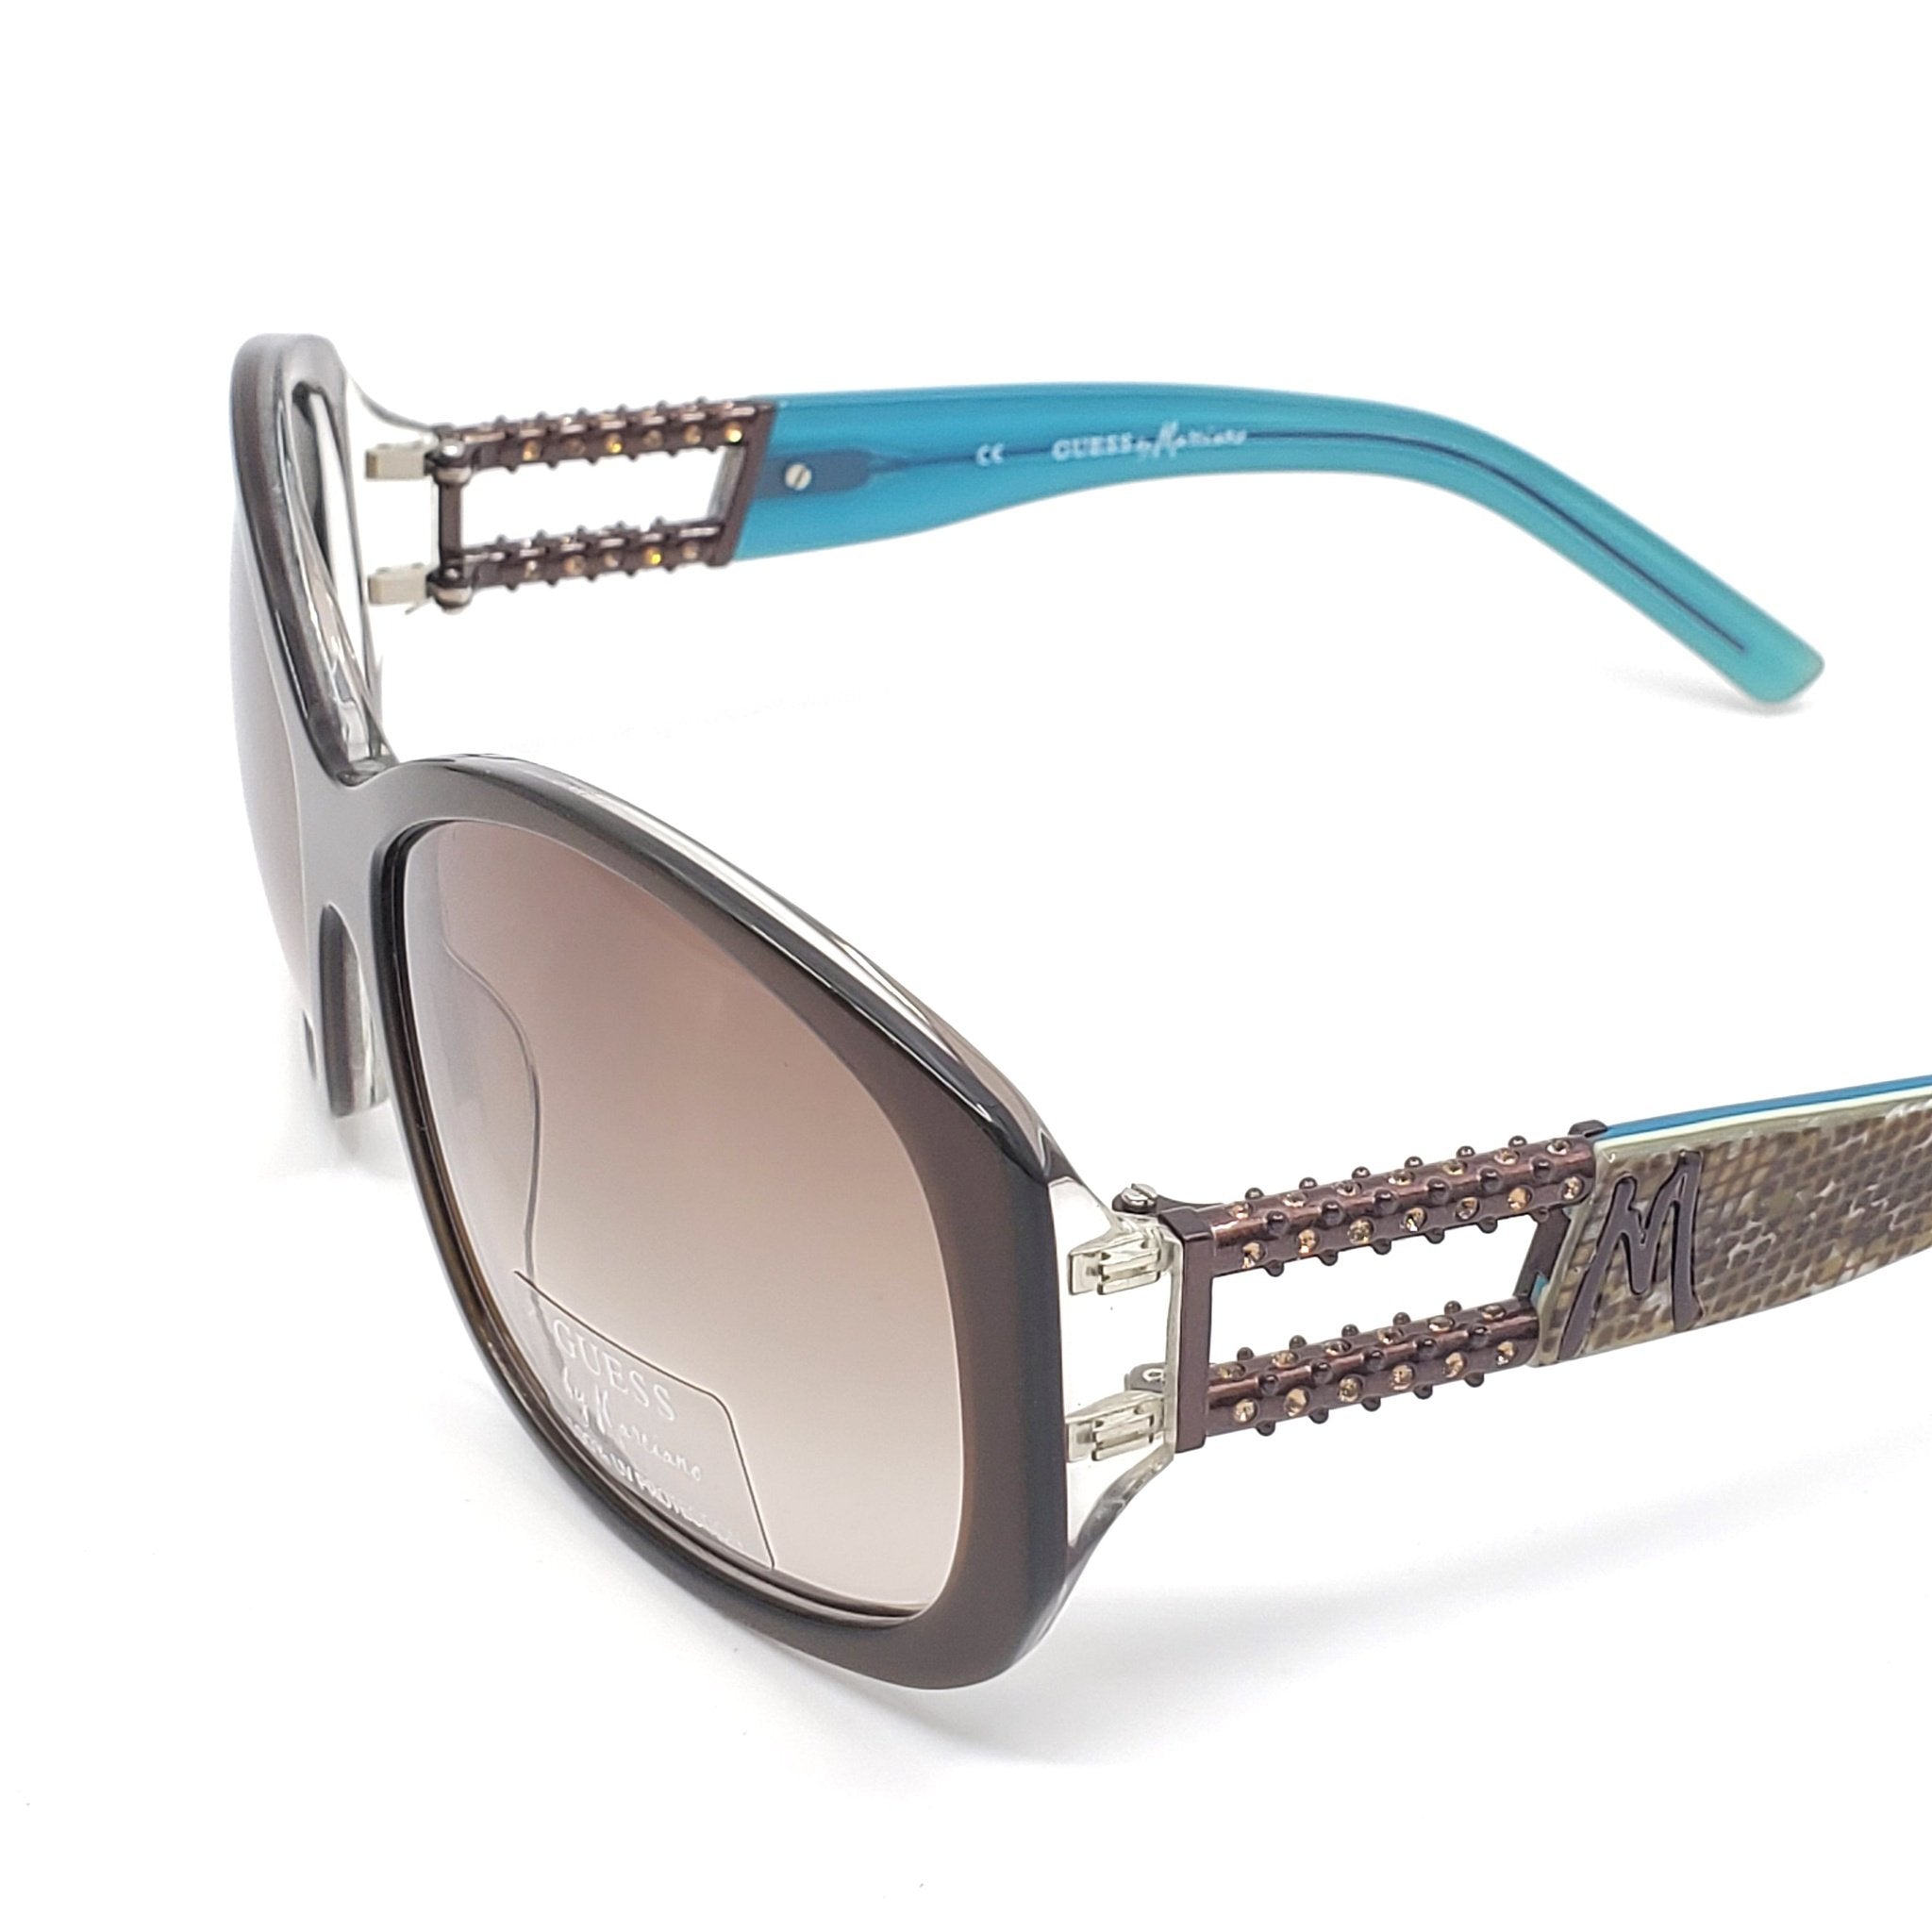 Guess by Marciano Sunglasses - GM610